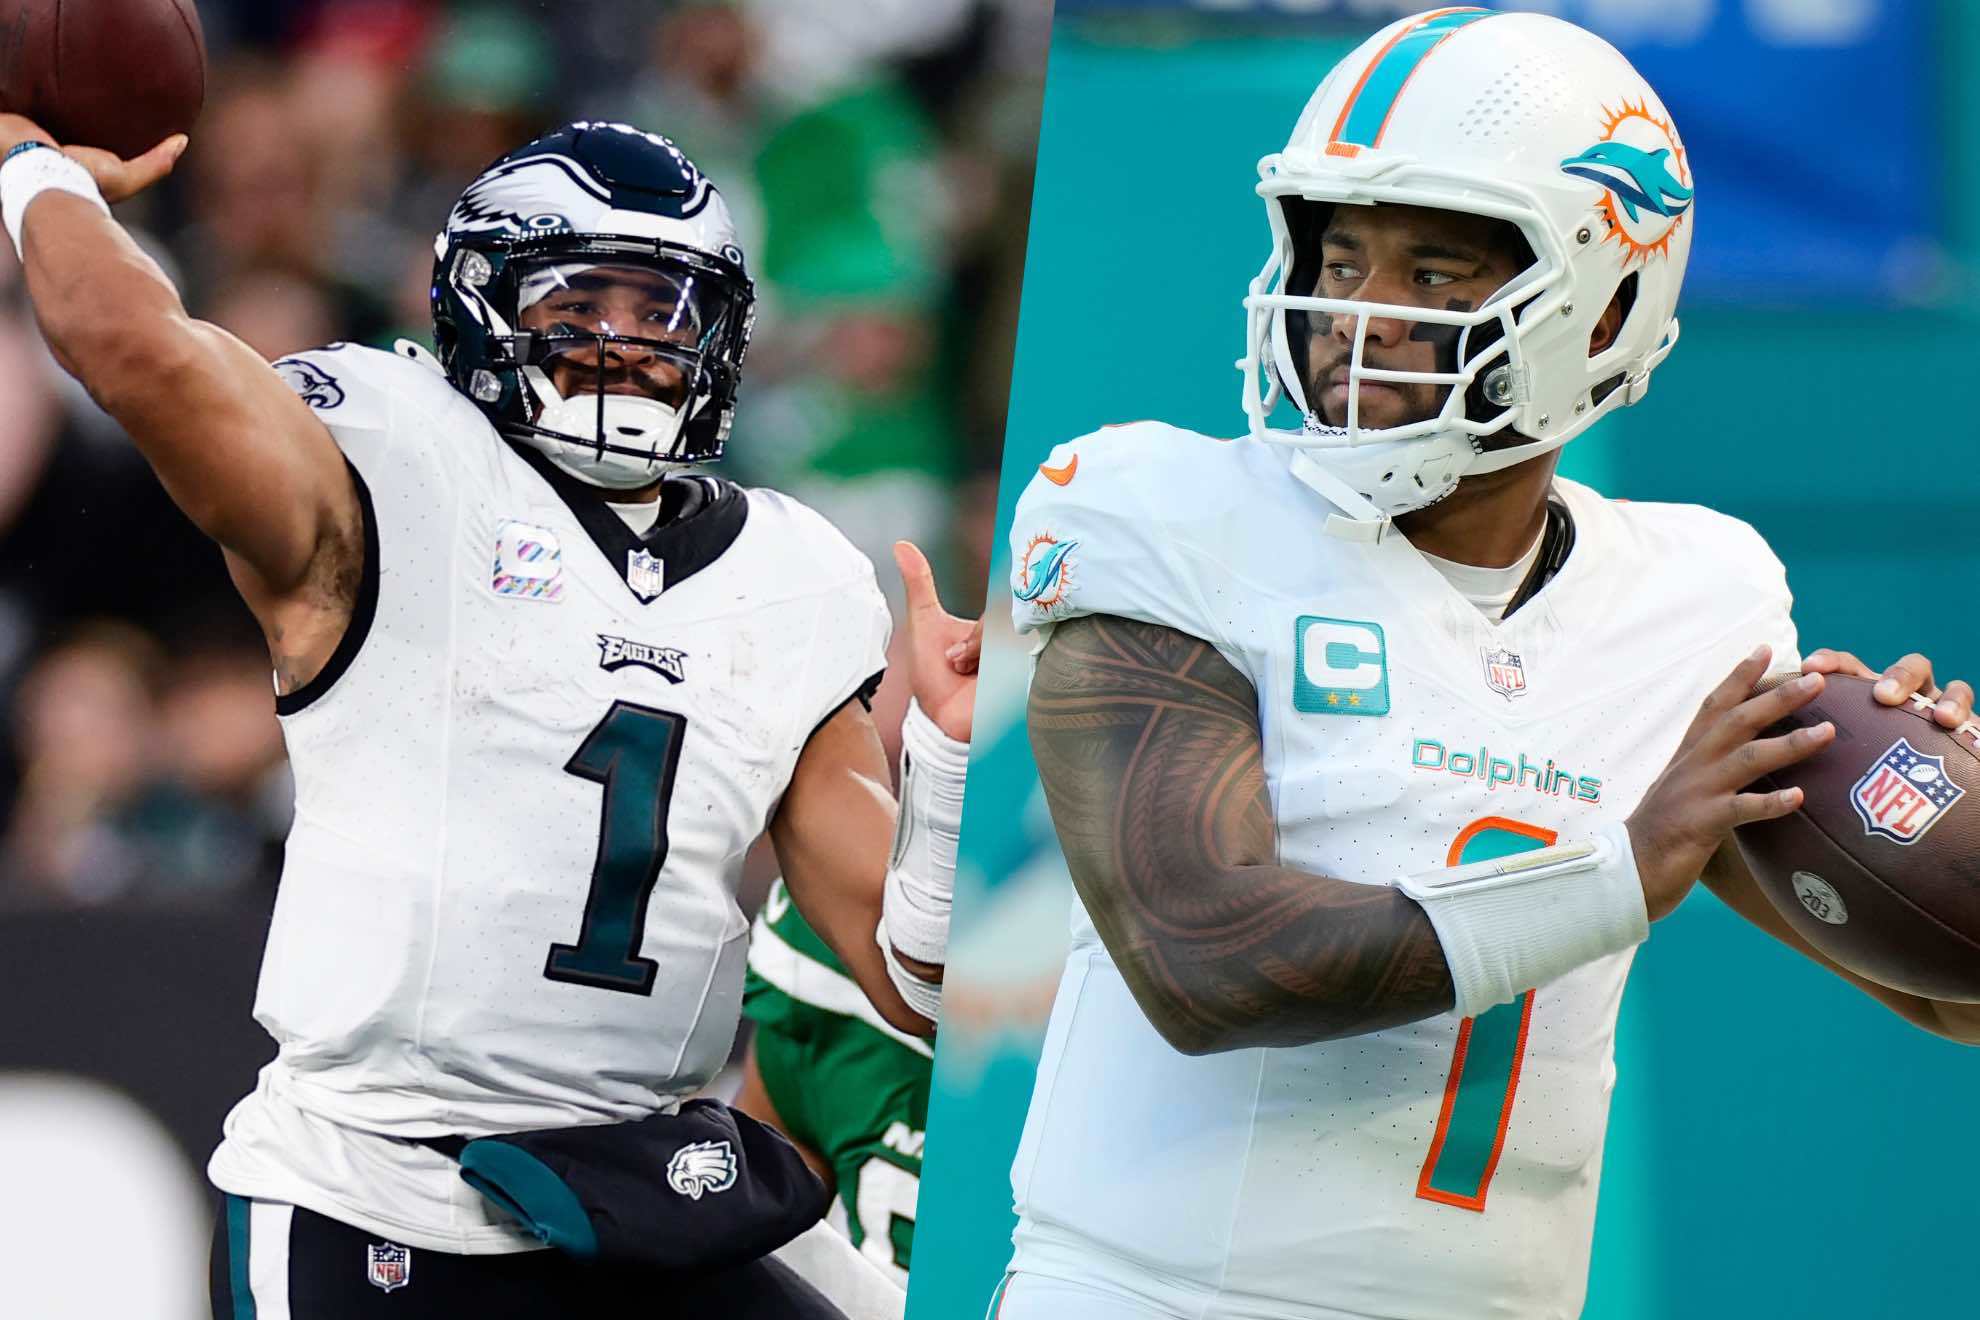 The Eagles and Dolphins will meet on Sunday night